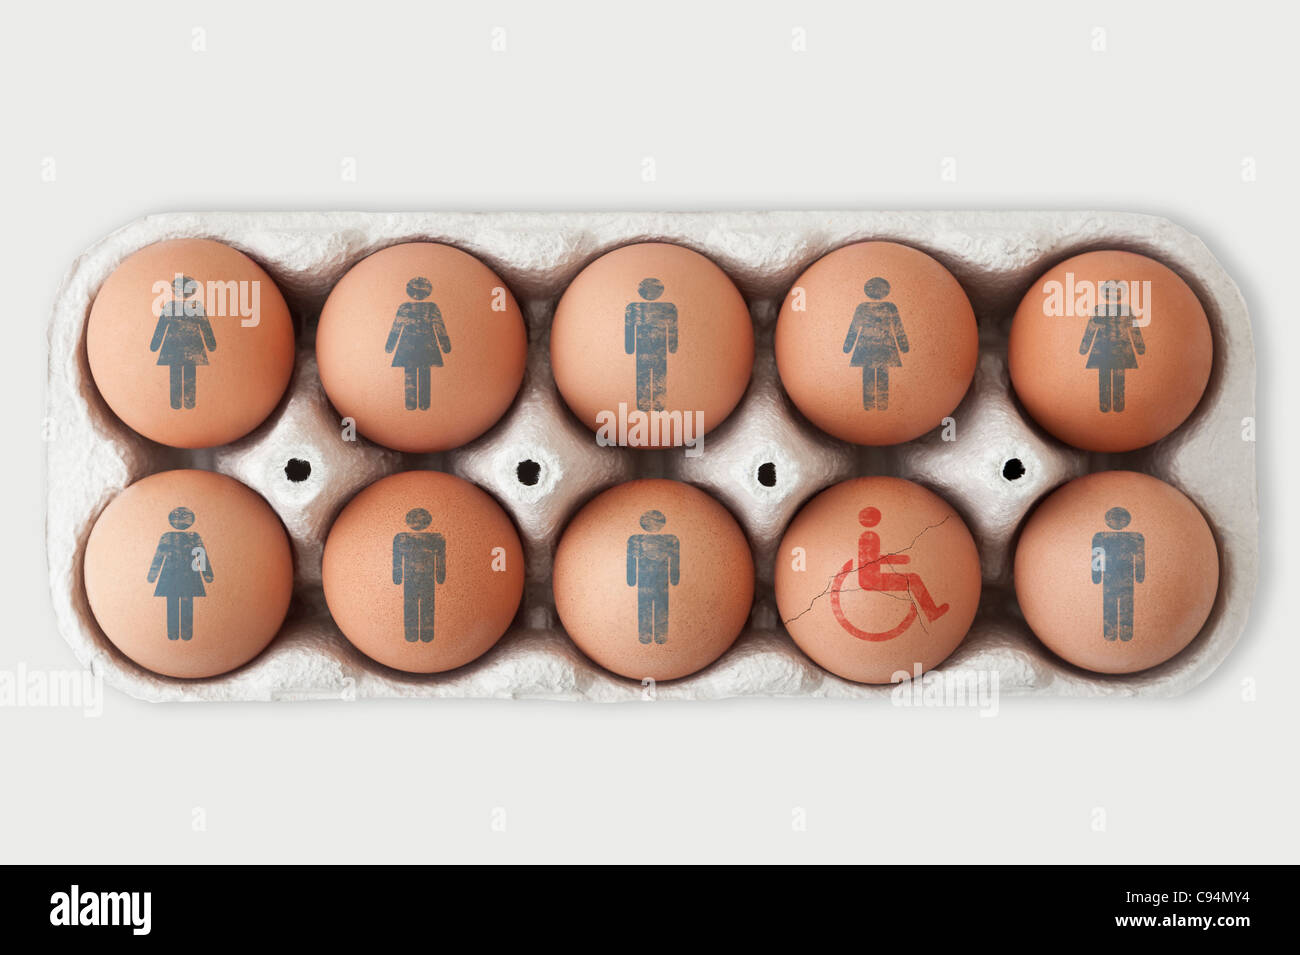 Box of eggs. Male and female symbols on nine of them and one cracked egg with a disabled symbol on it Stock Photo